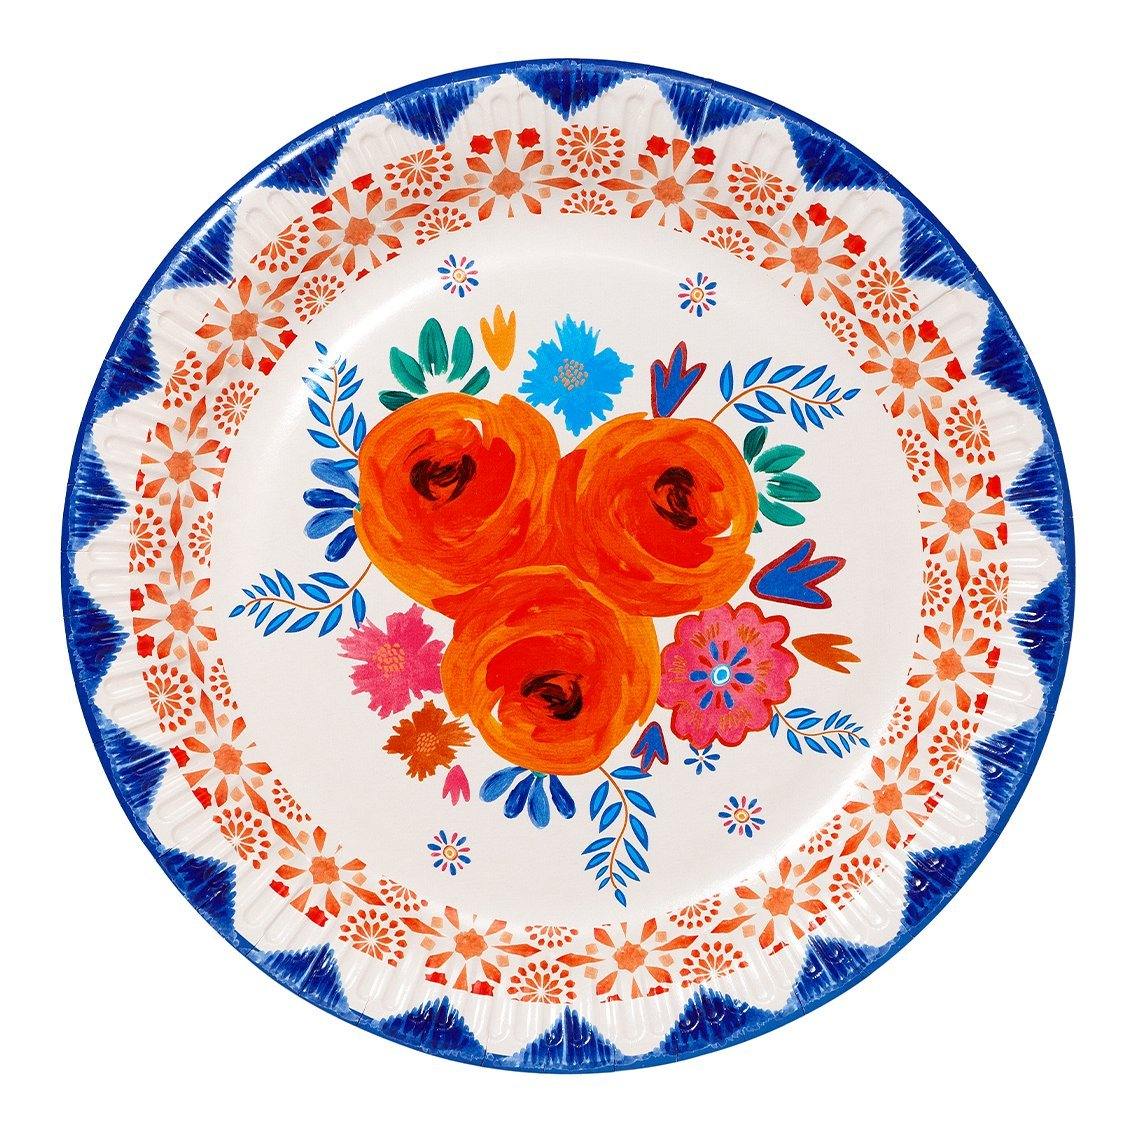 Floral Paper Plate, Boho - The shop of nice things